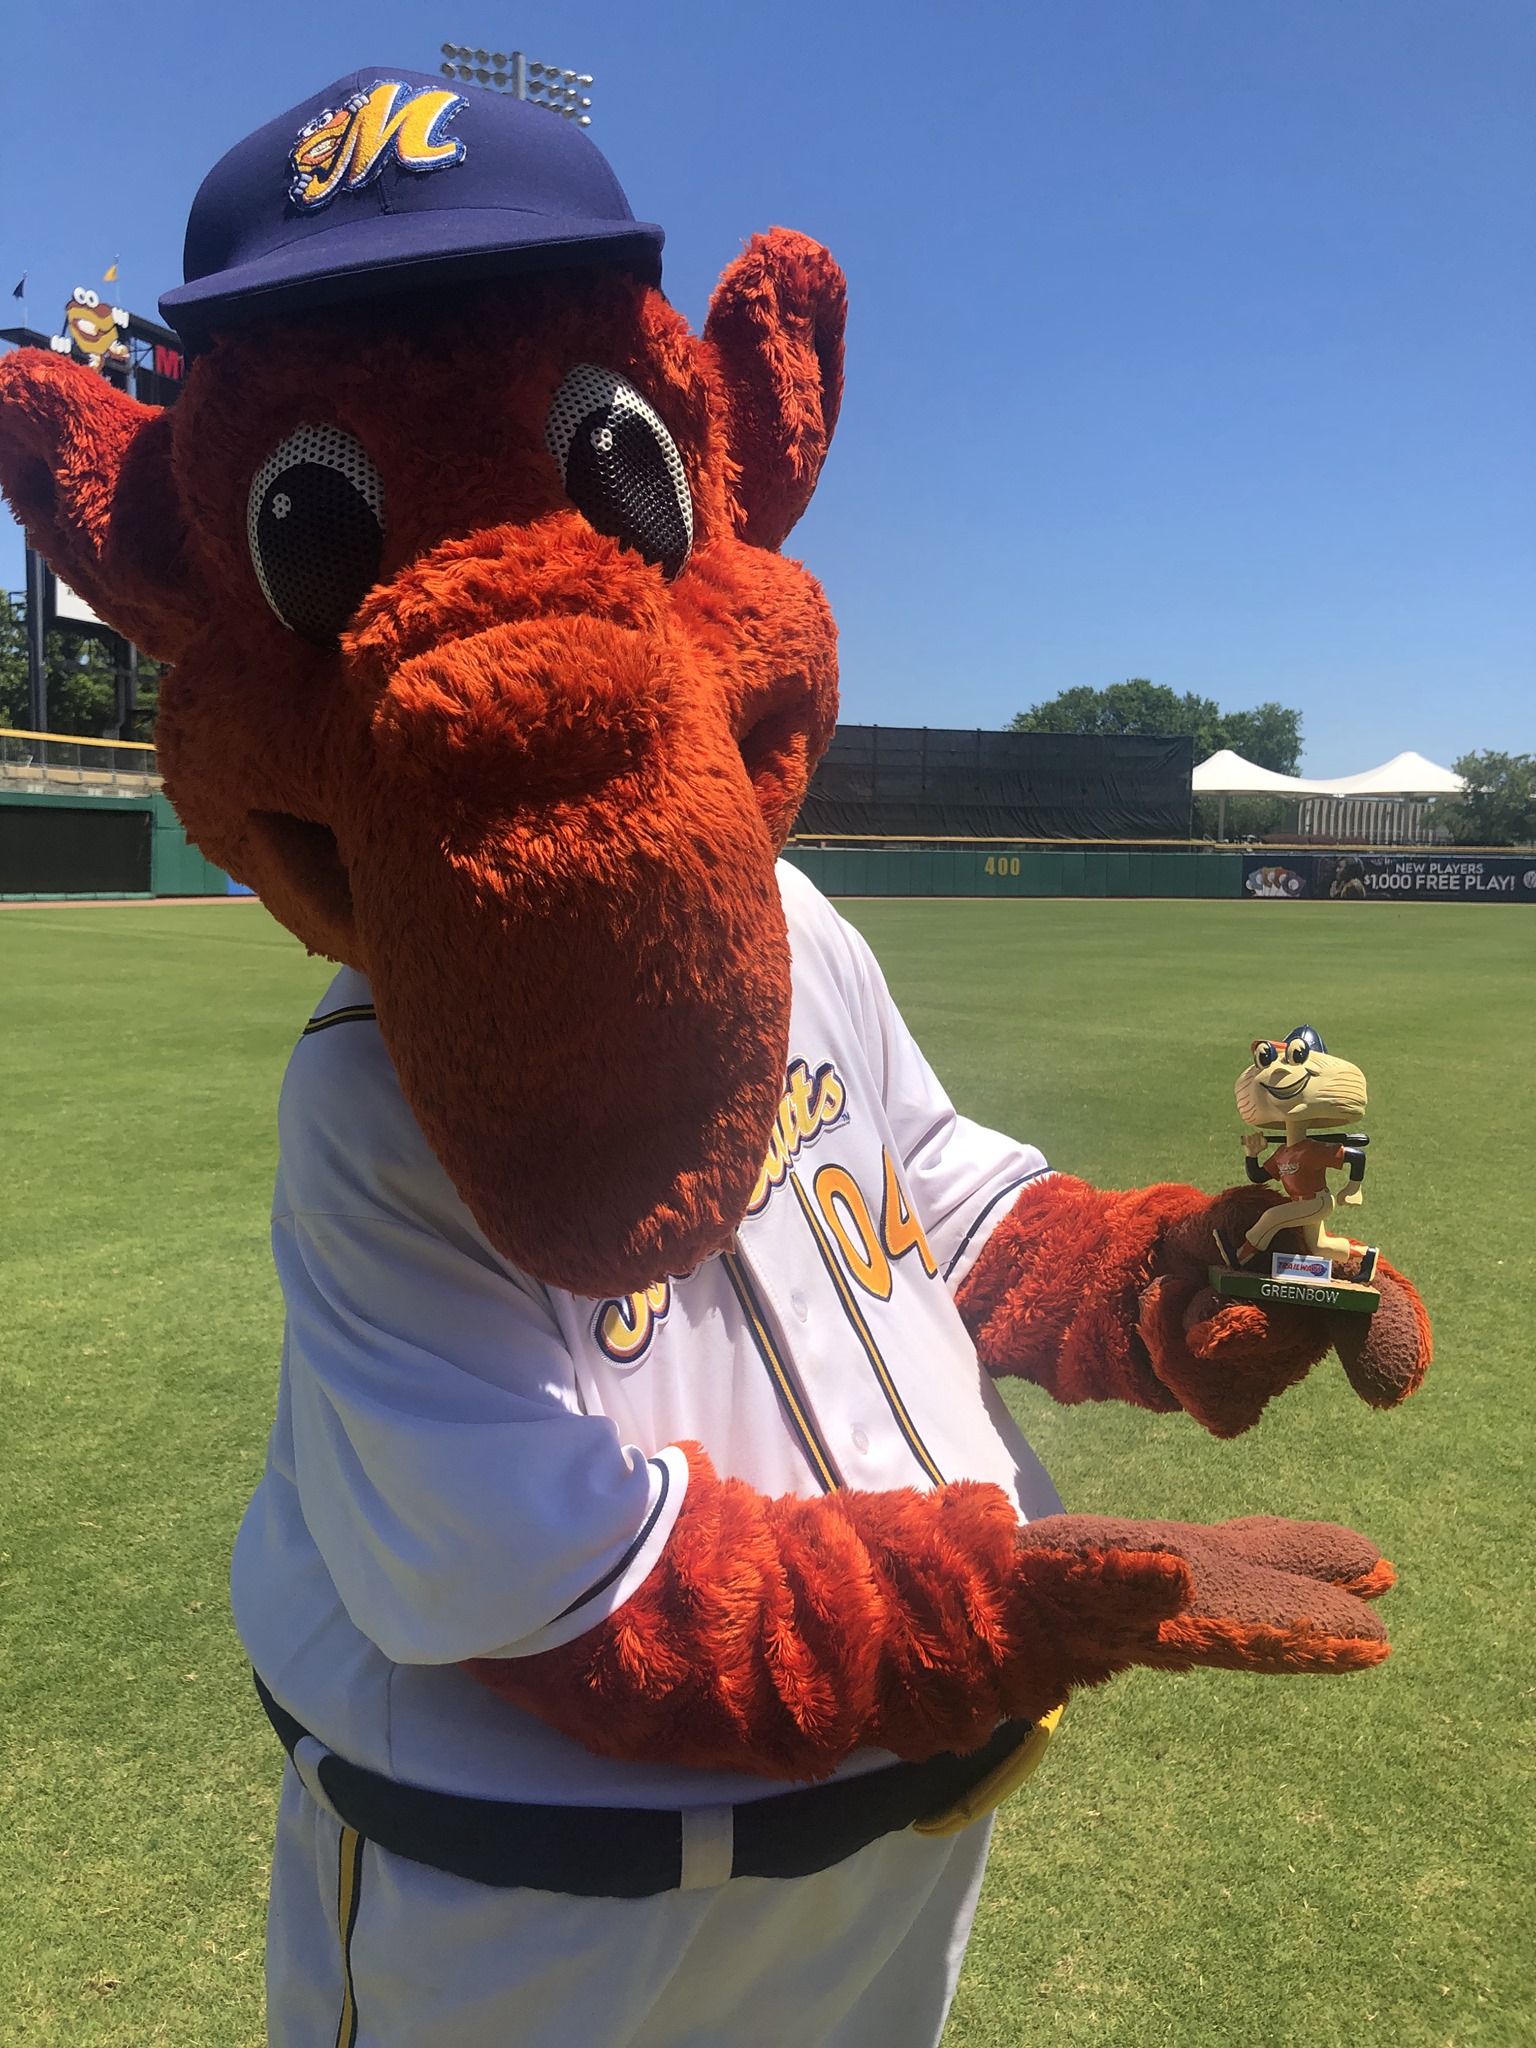 Montgomery Biscuits release 2021 promo schedule. Here are the details. | The Bama Buzz